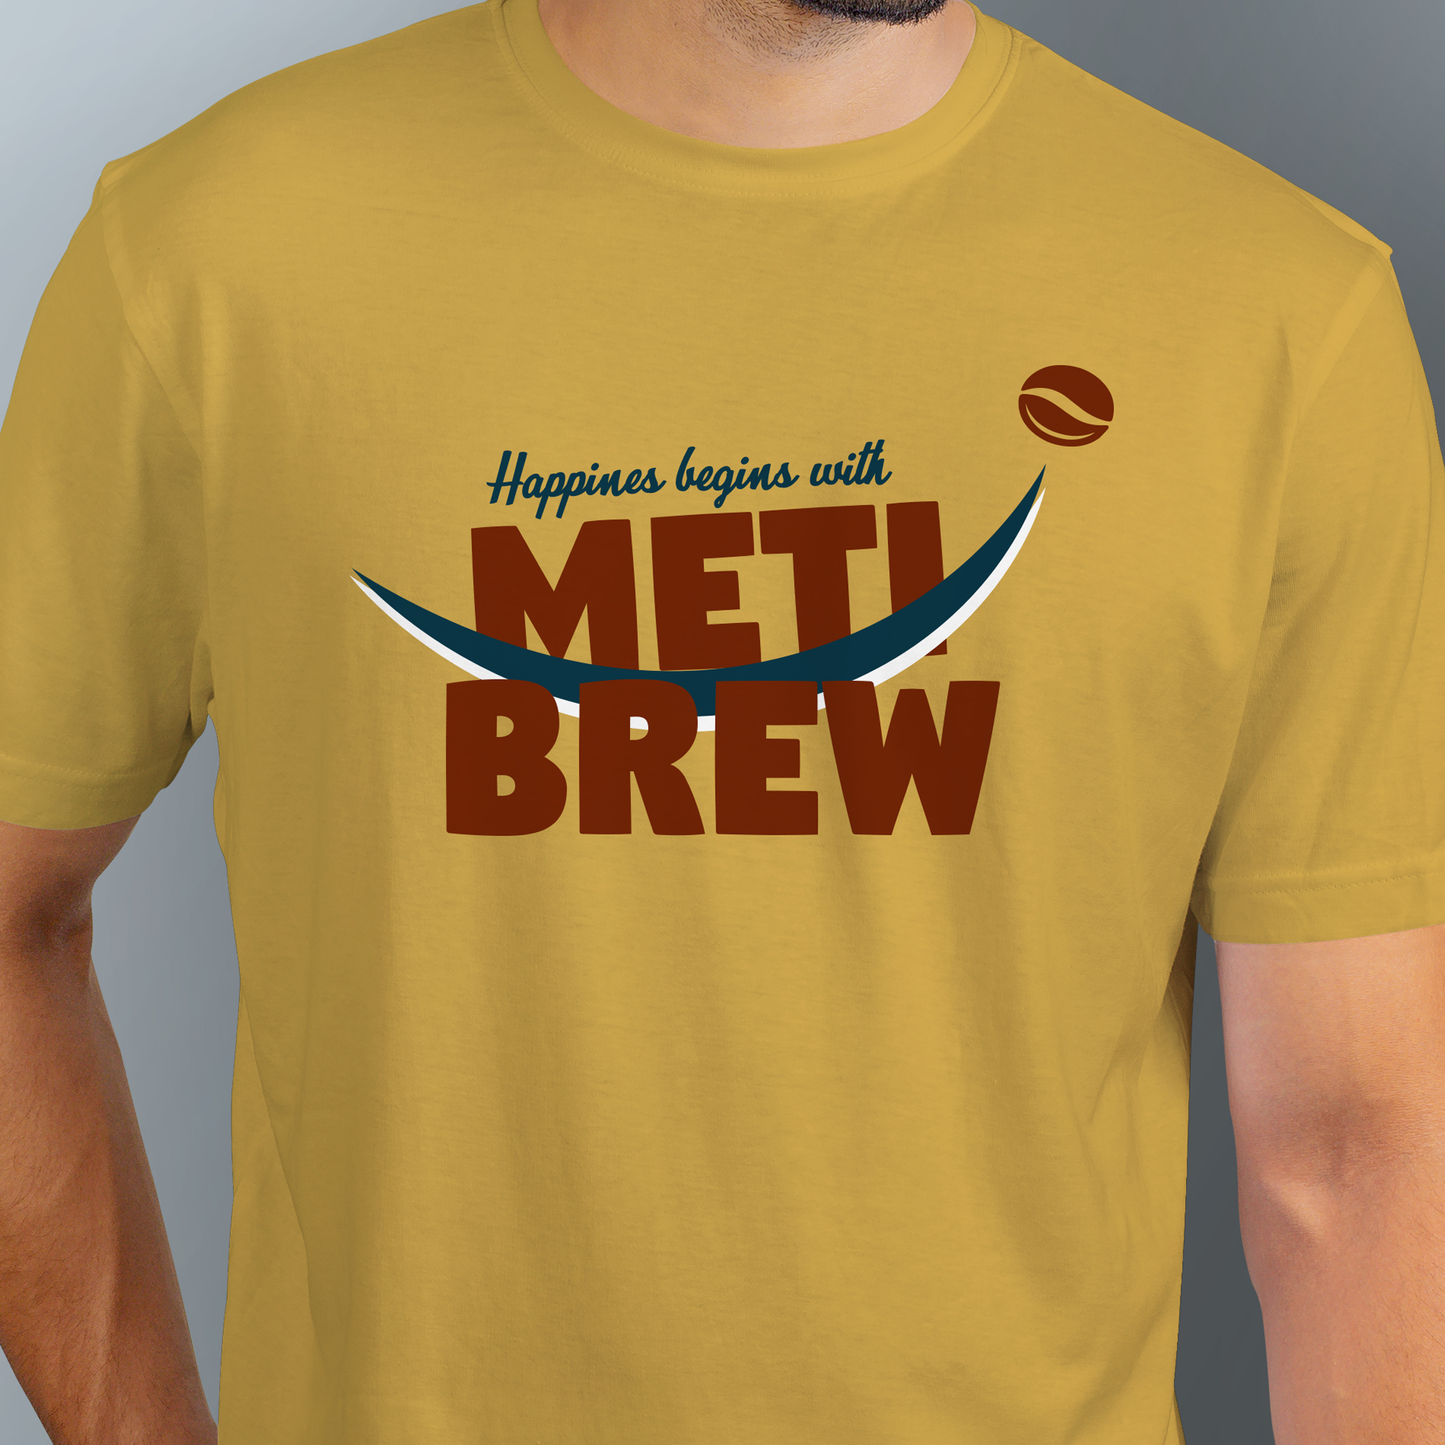 "Happiness begins with Meti Brew" Tee